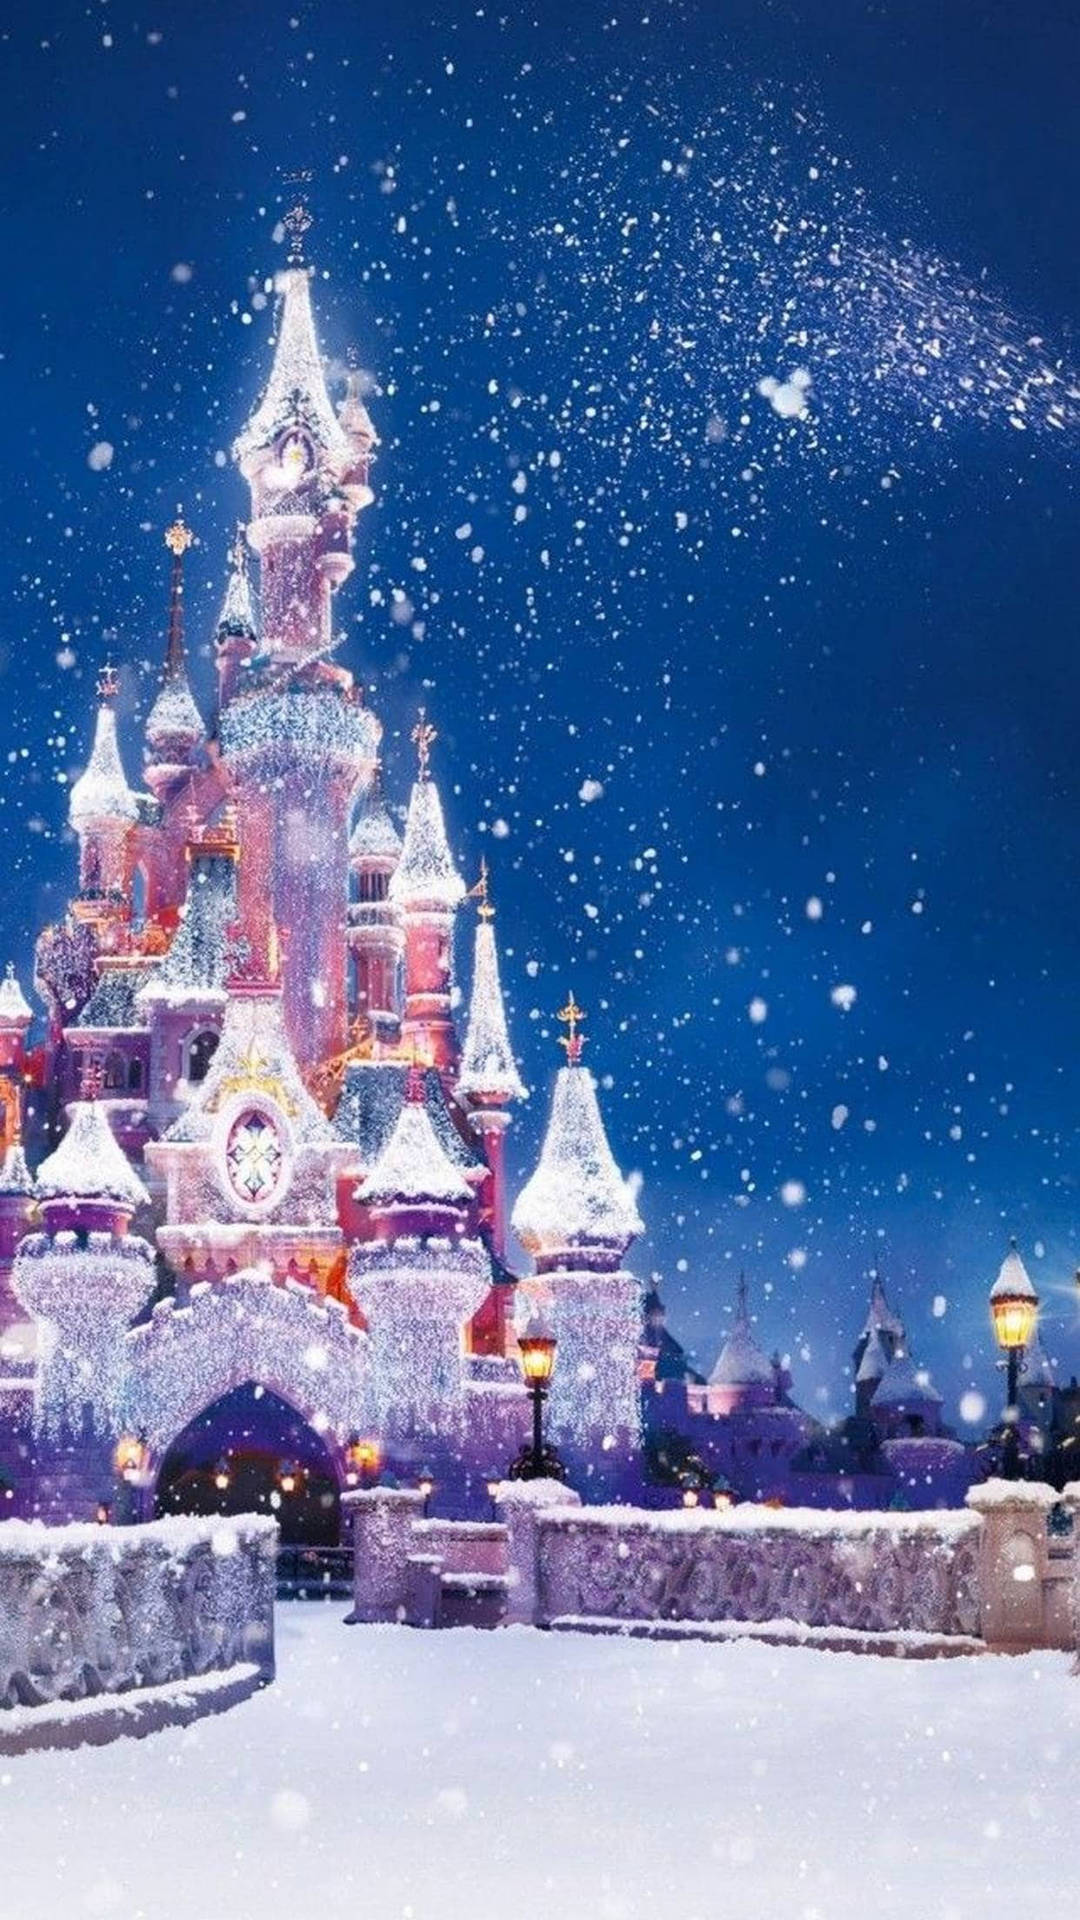 IPhone wallpaper of a castle with snow falling around it - Castle, cute Christmas